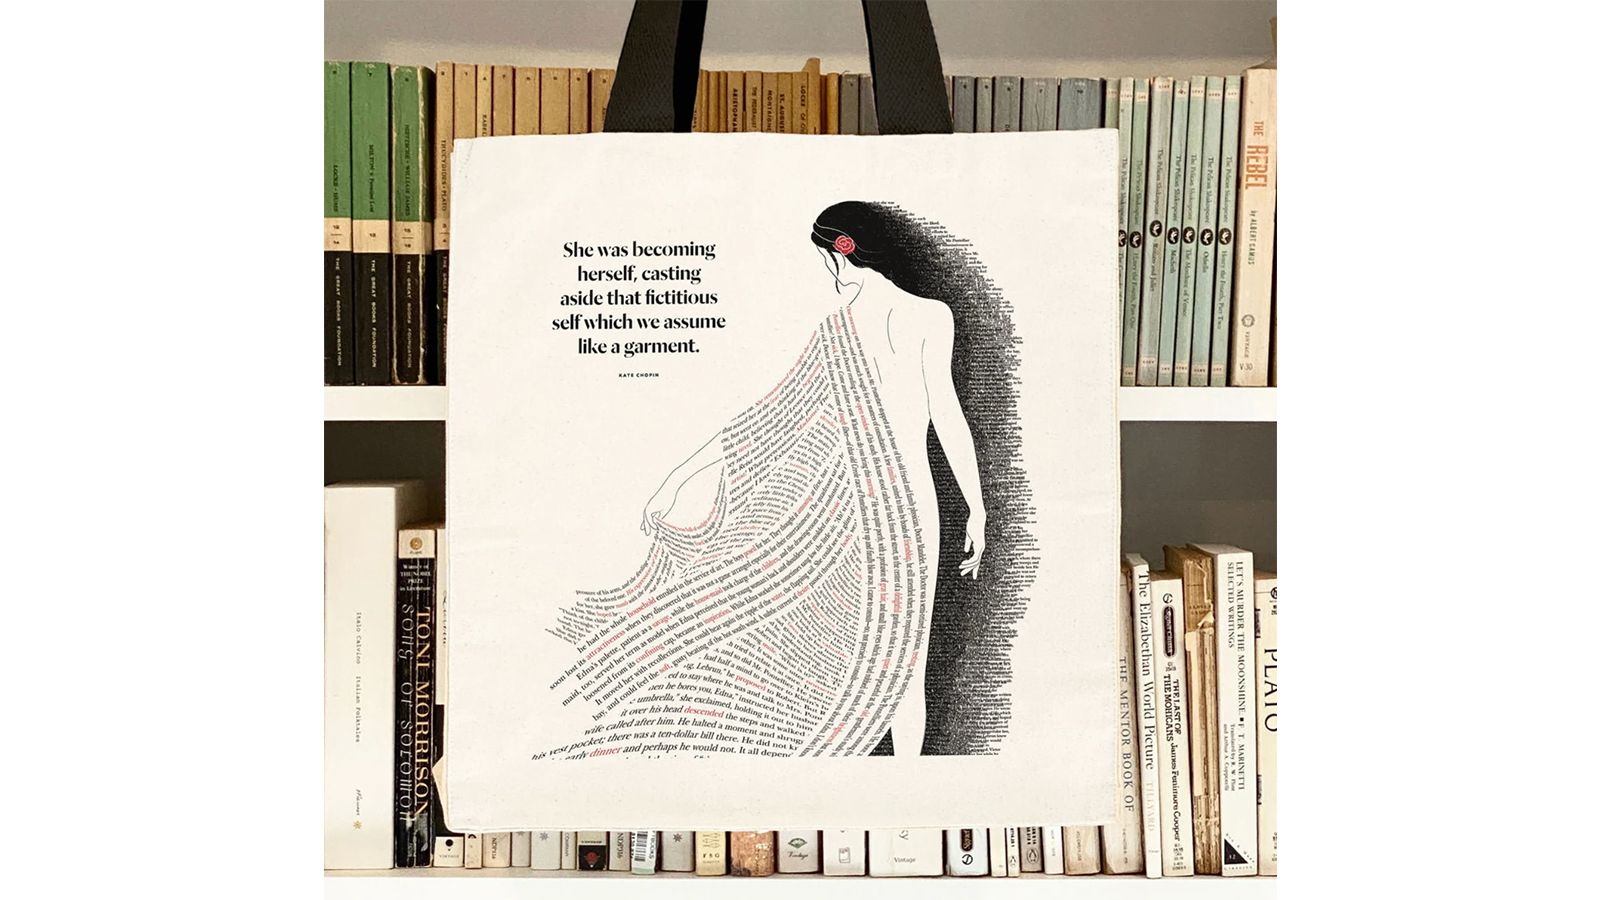 Literary gifts for booklovers. Handbags that look real books